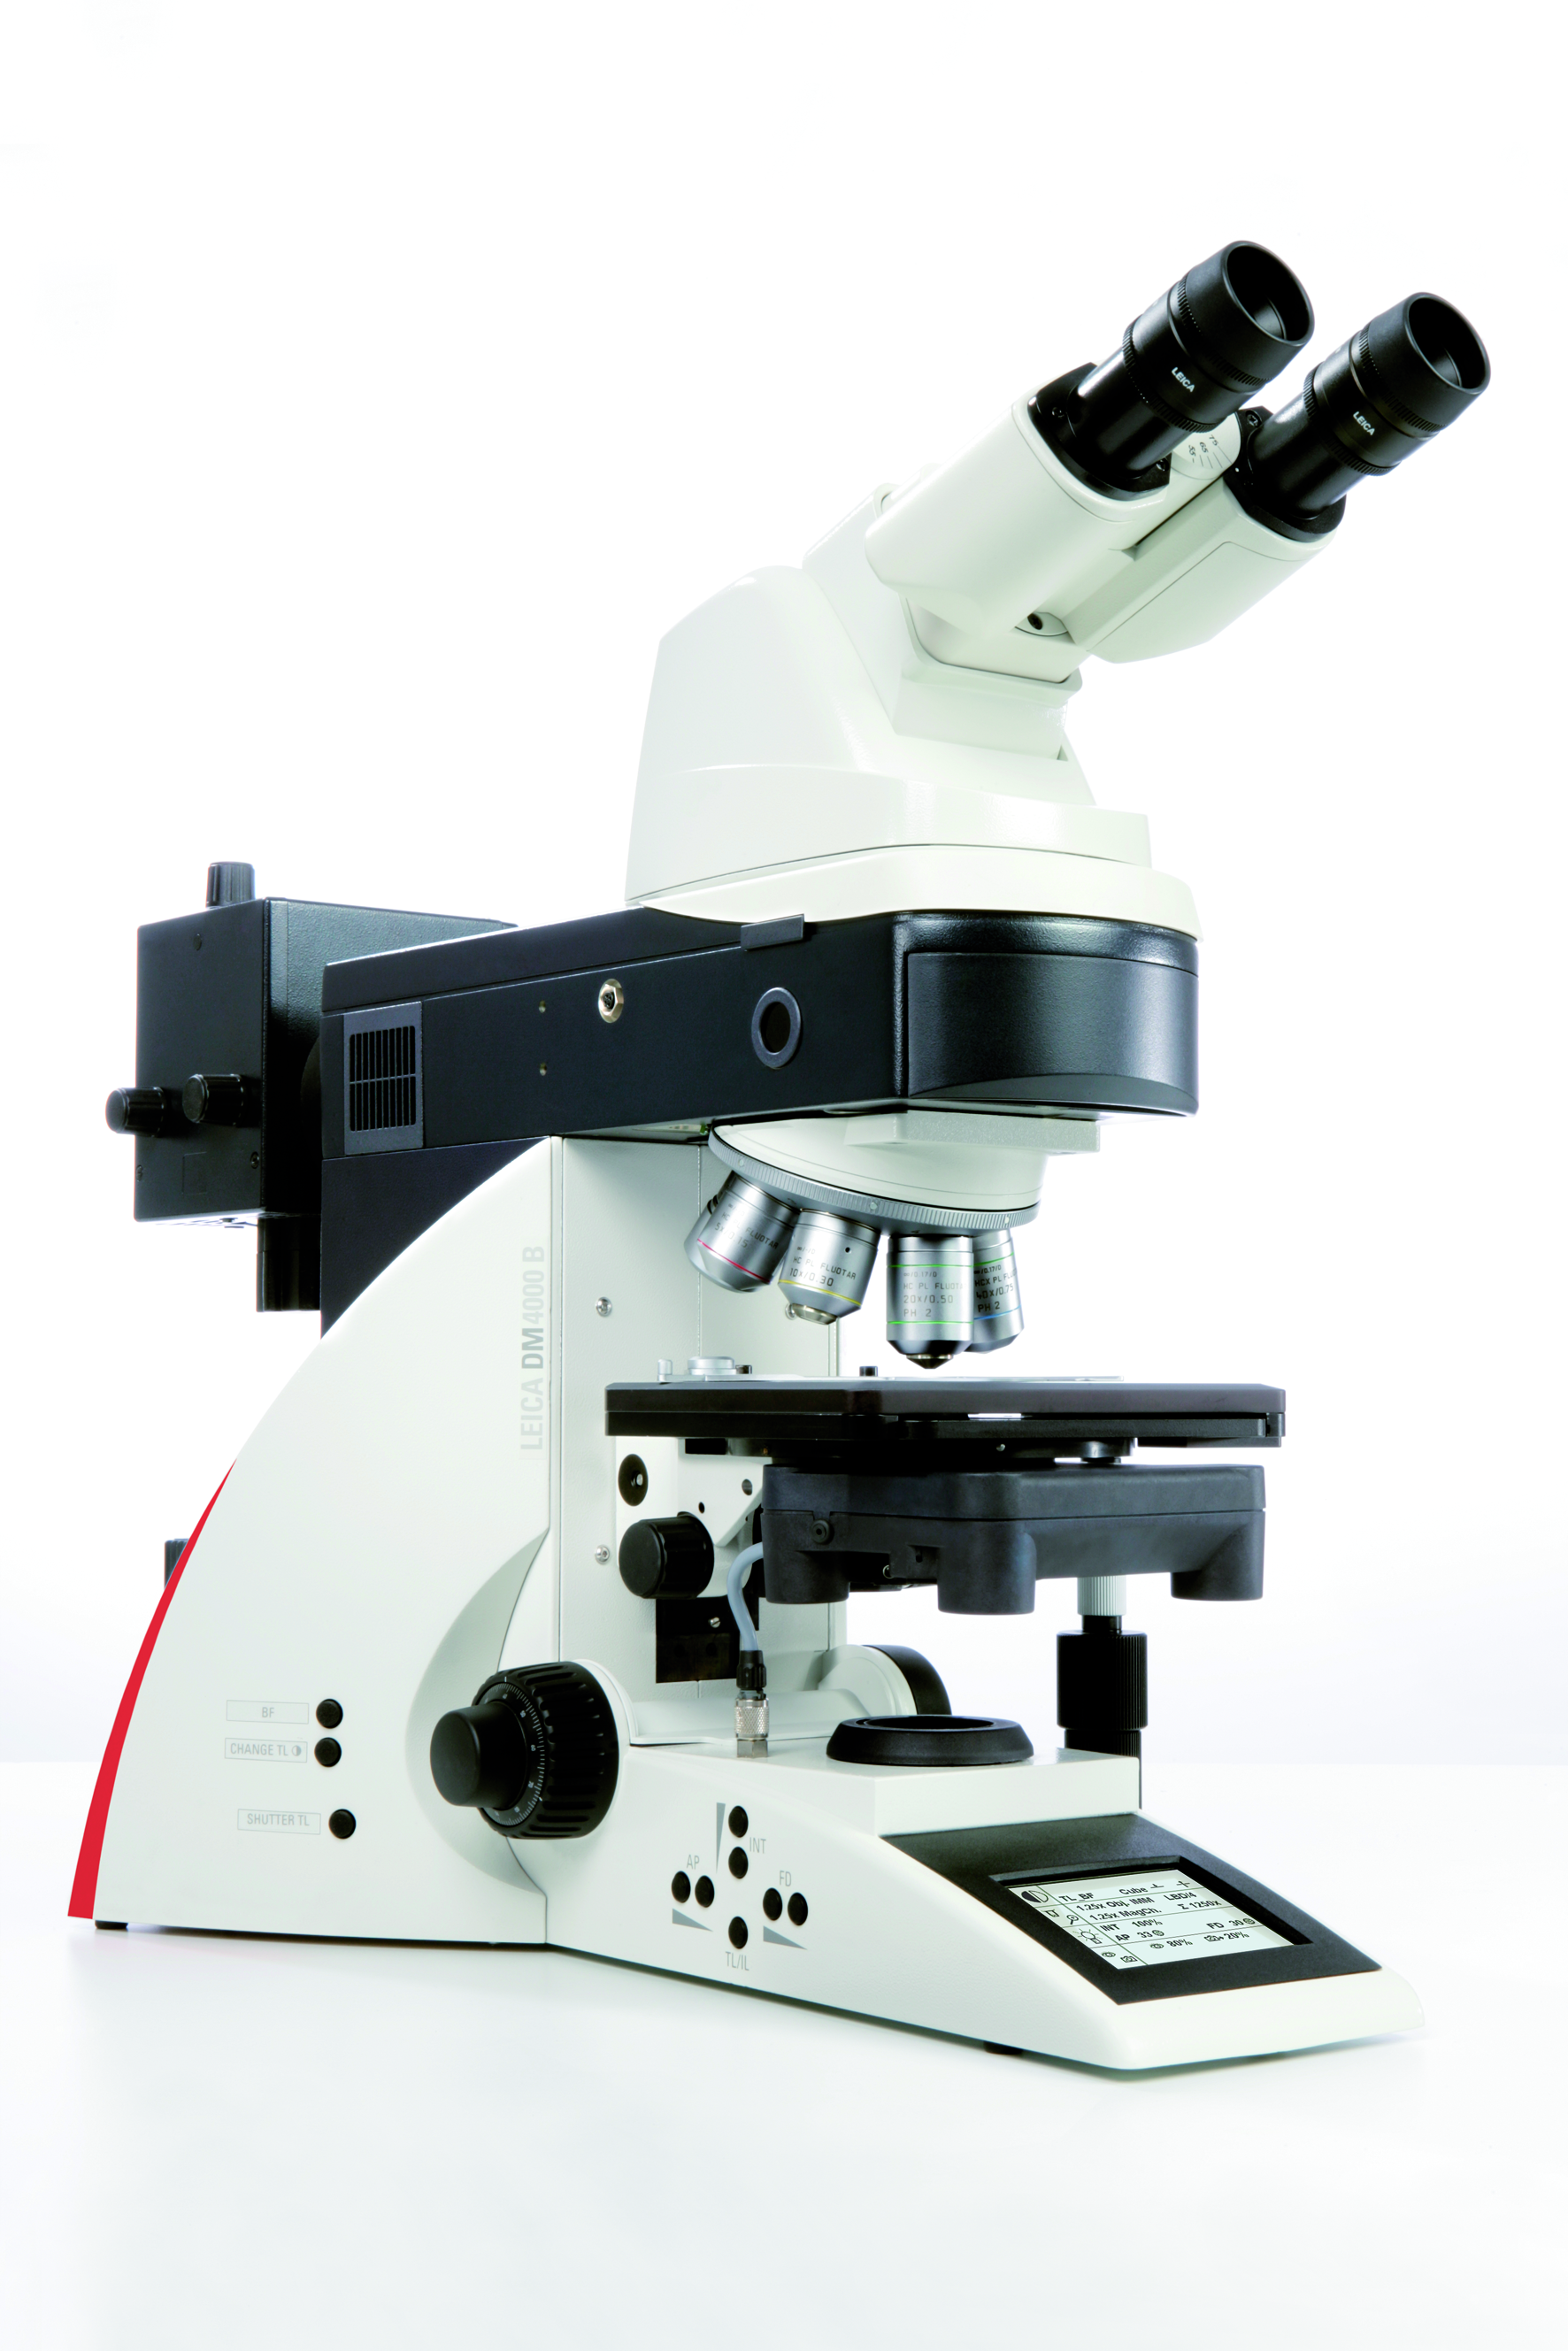 The Leica DM4000 B features Intelligent Automation for intuitive operation and reproducible results.